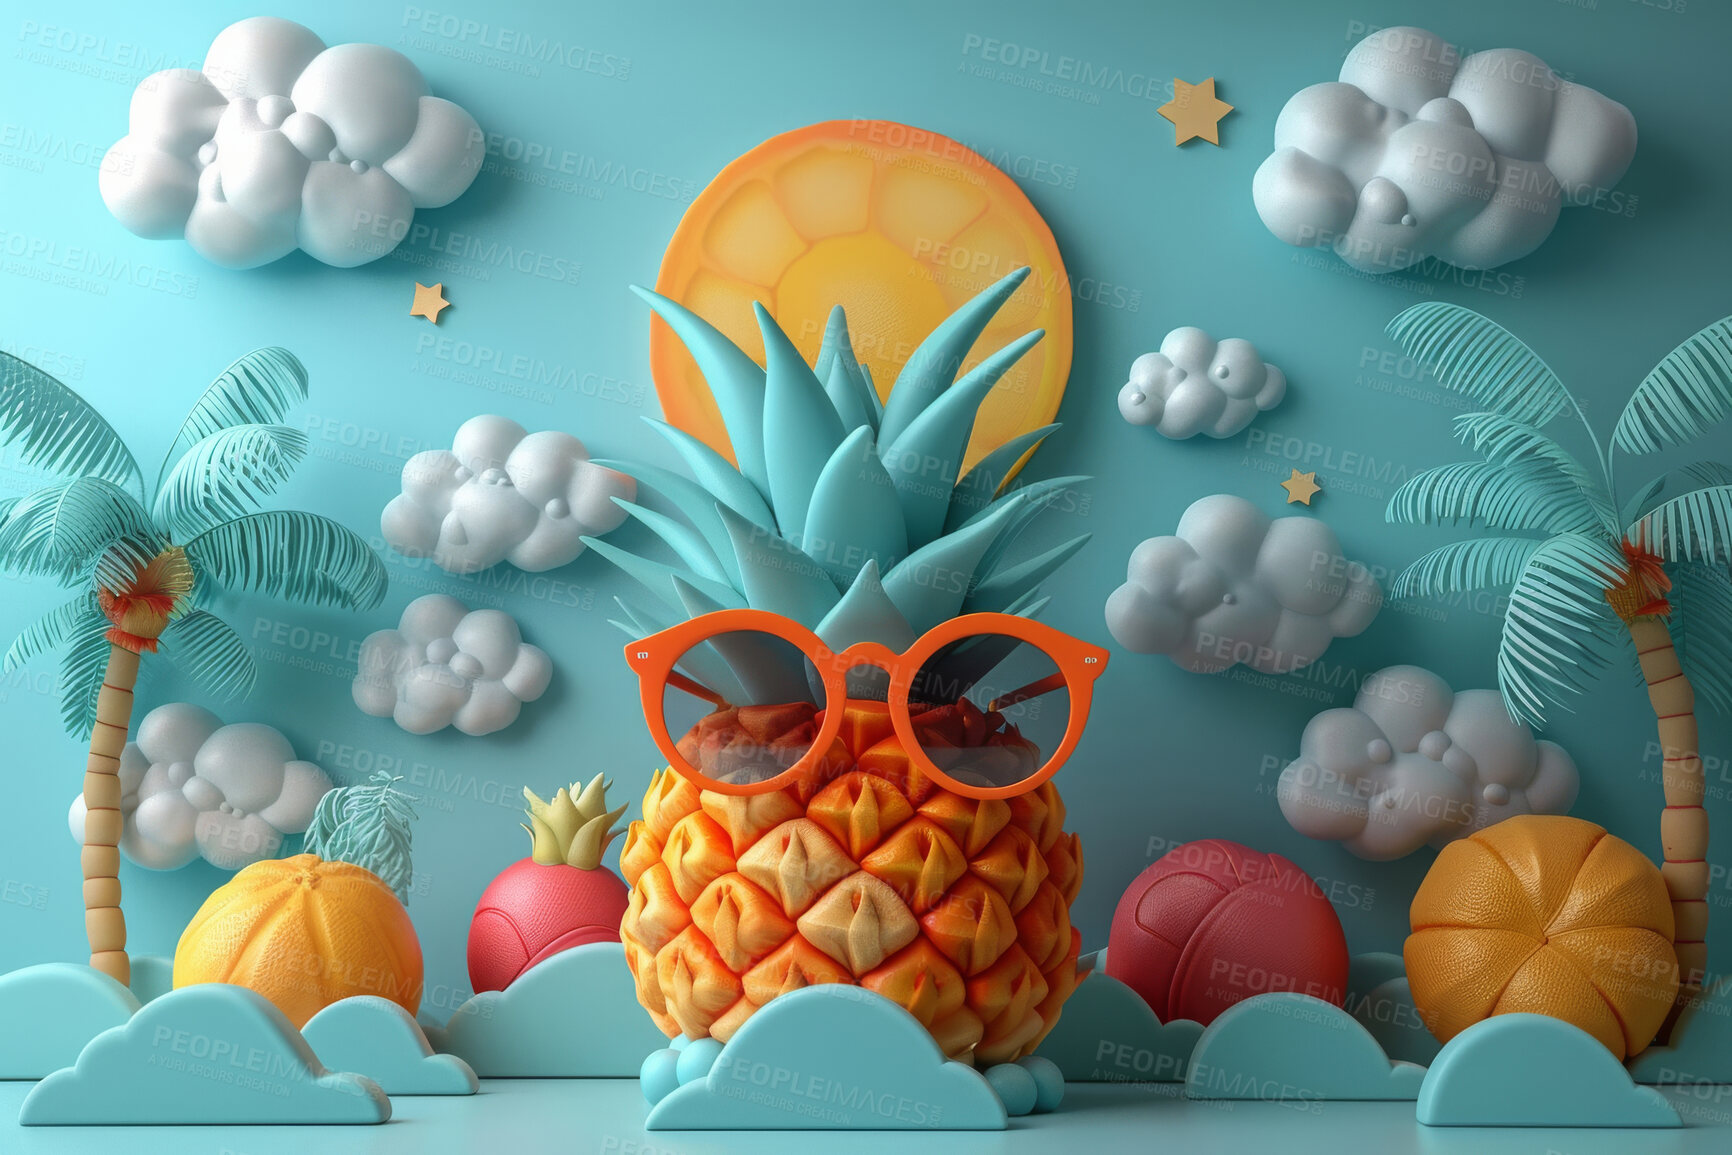 Buy stock photo Cartoon, 3D and illustrations for travel, vacation or tropical holiday concept for mock up. Pineapple, palm trees and miniature objects. Relaxation, journey and playful concept with pastel colours